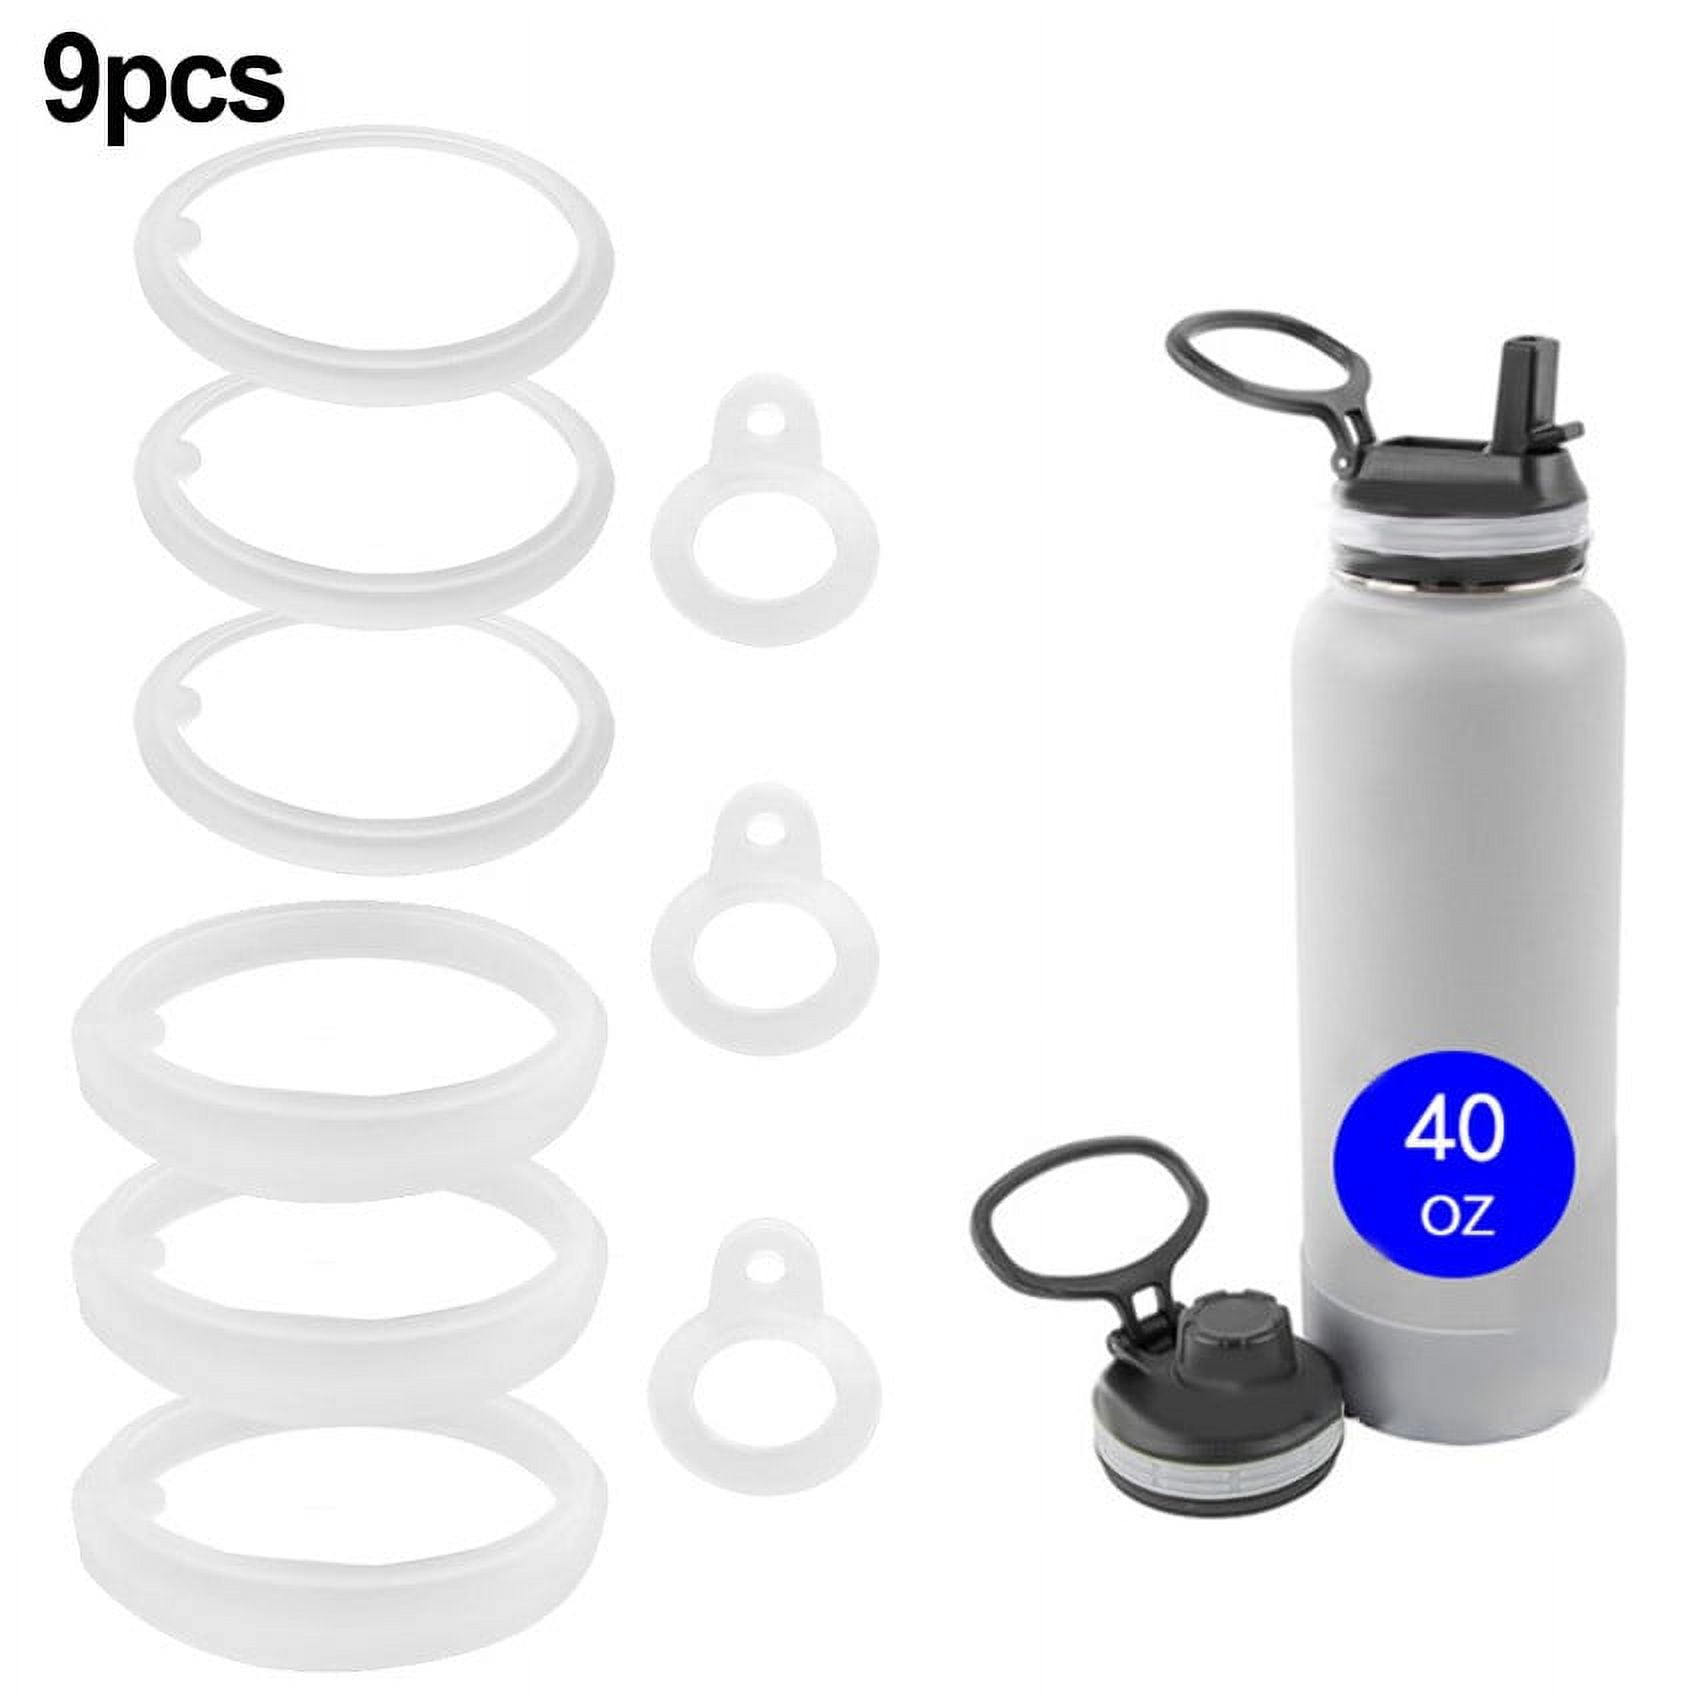  6pcs Water Bottle Gasket Replacement for Thermoflask 40oz, 3  Styles Silicone Gaskets Bottle Sealing Ring Water Bottle Lid Accessories  with 1 Removal Tool : Sports & Outdoors